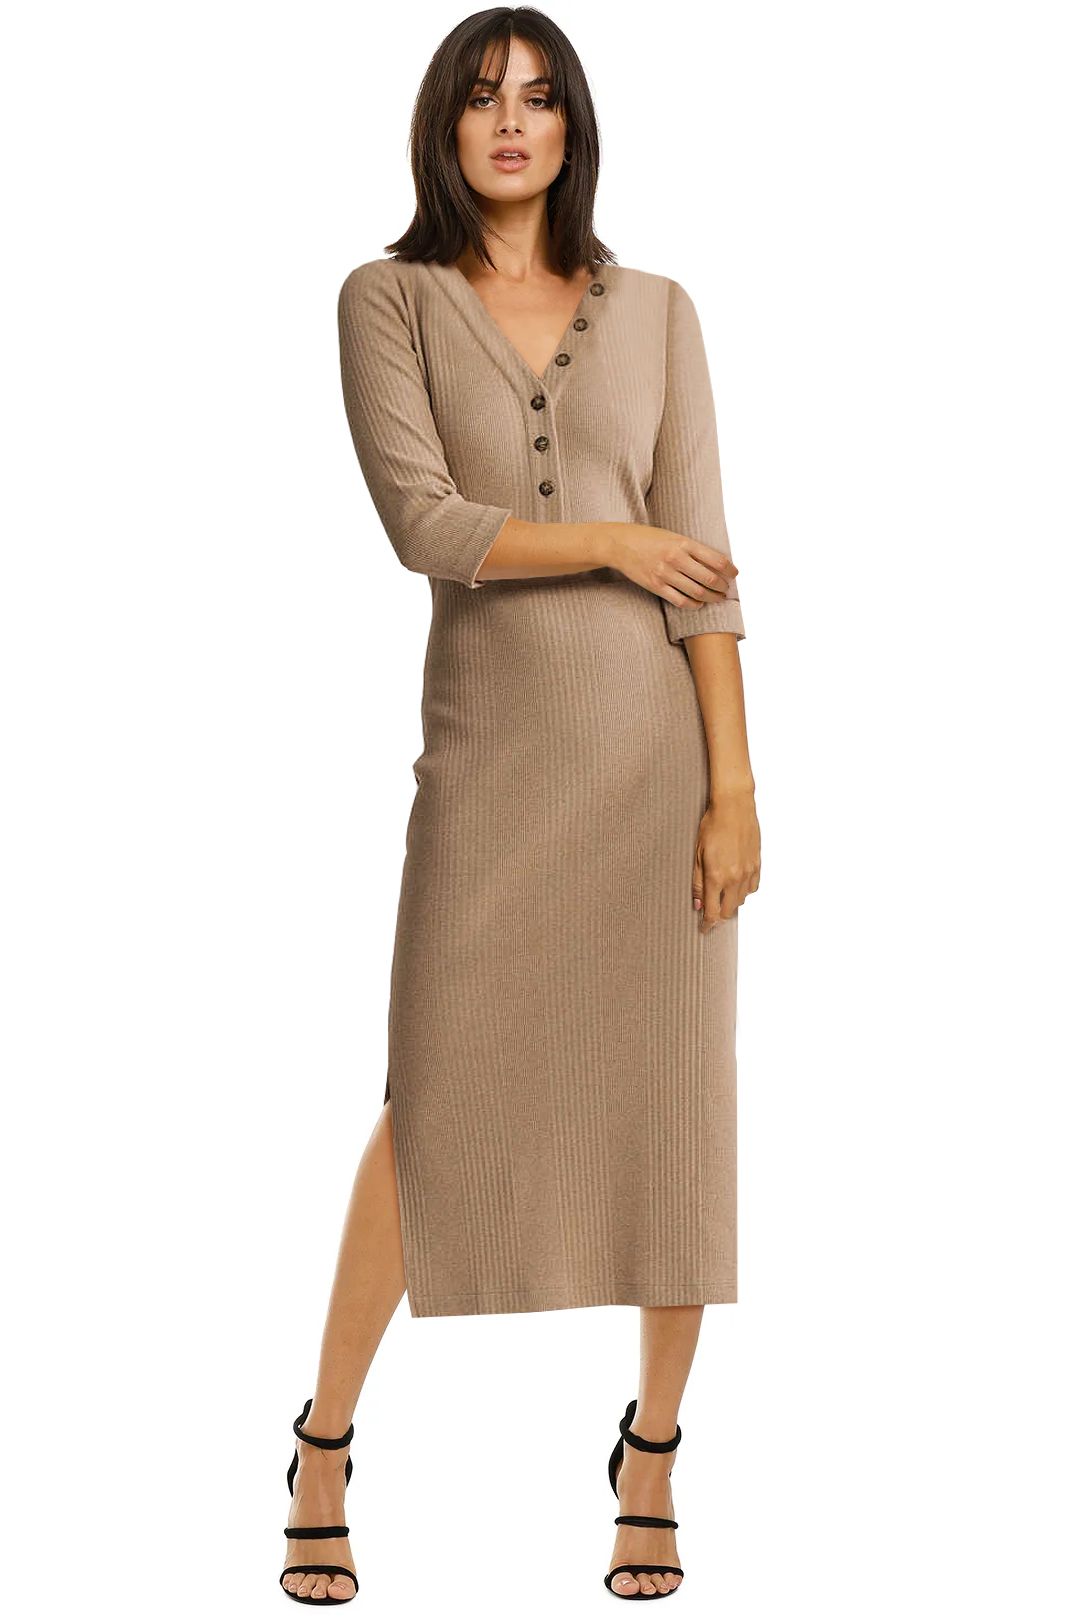 Ribbed Jersey Dress in Barley by 